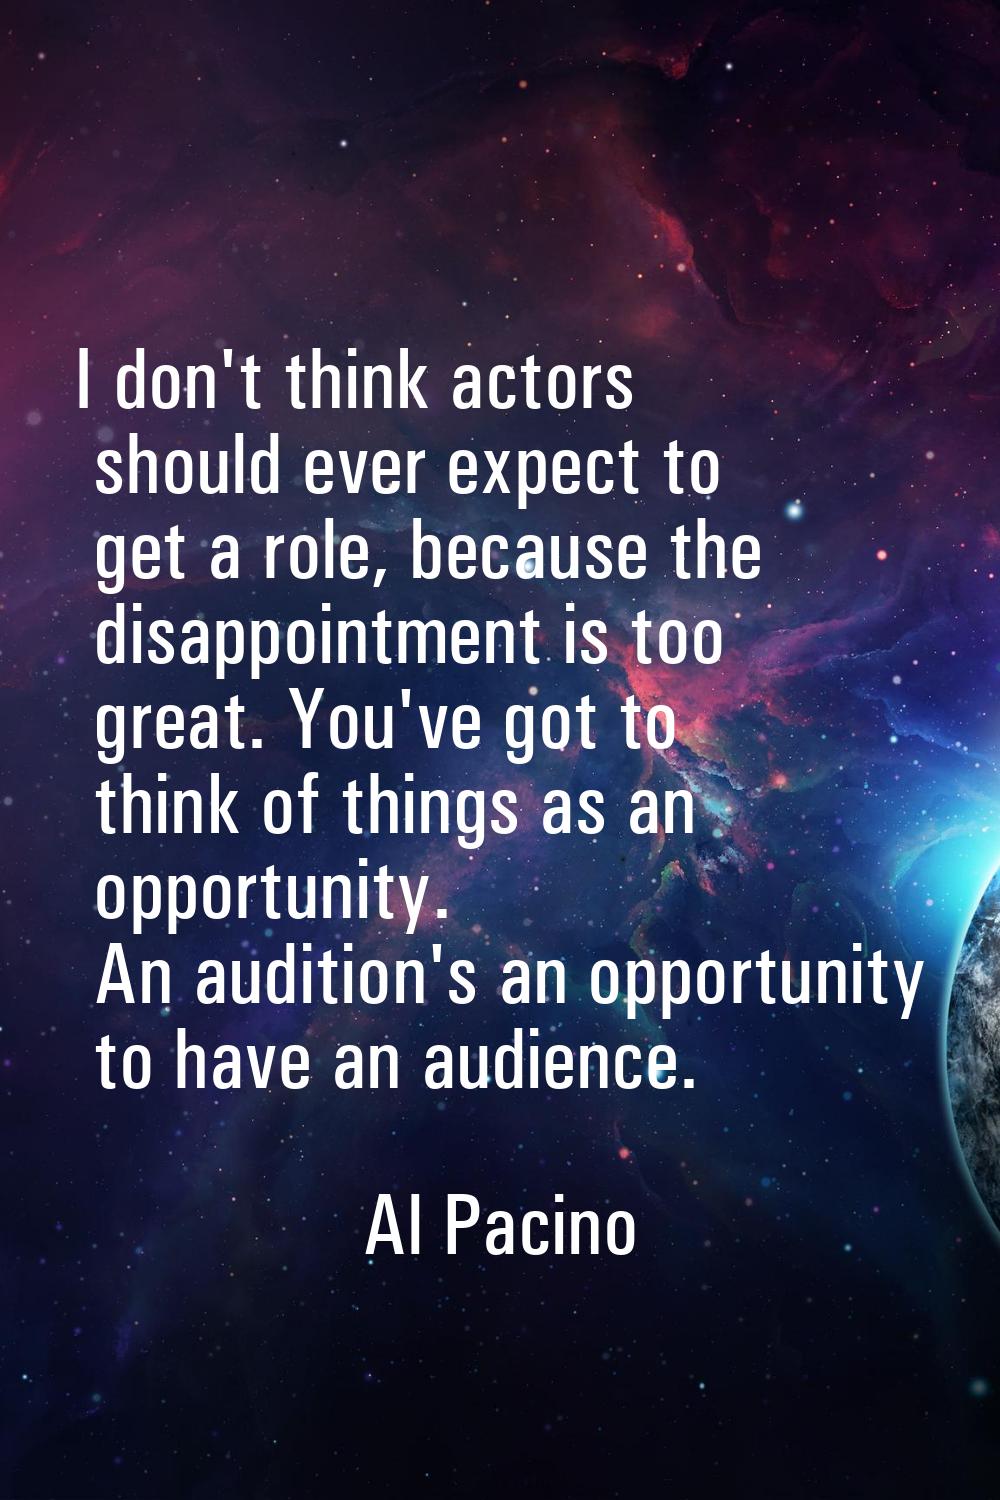 I don't think actors should ever expect to get a role, because the disappointment is too great. You